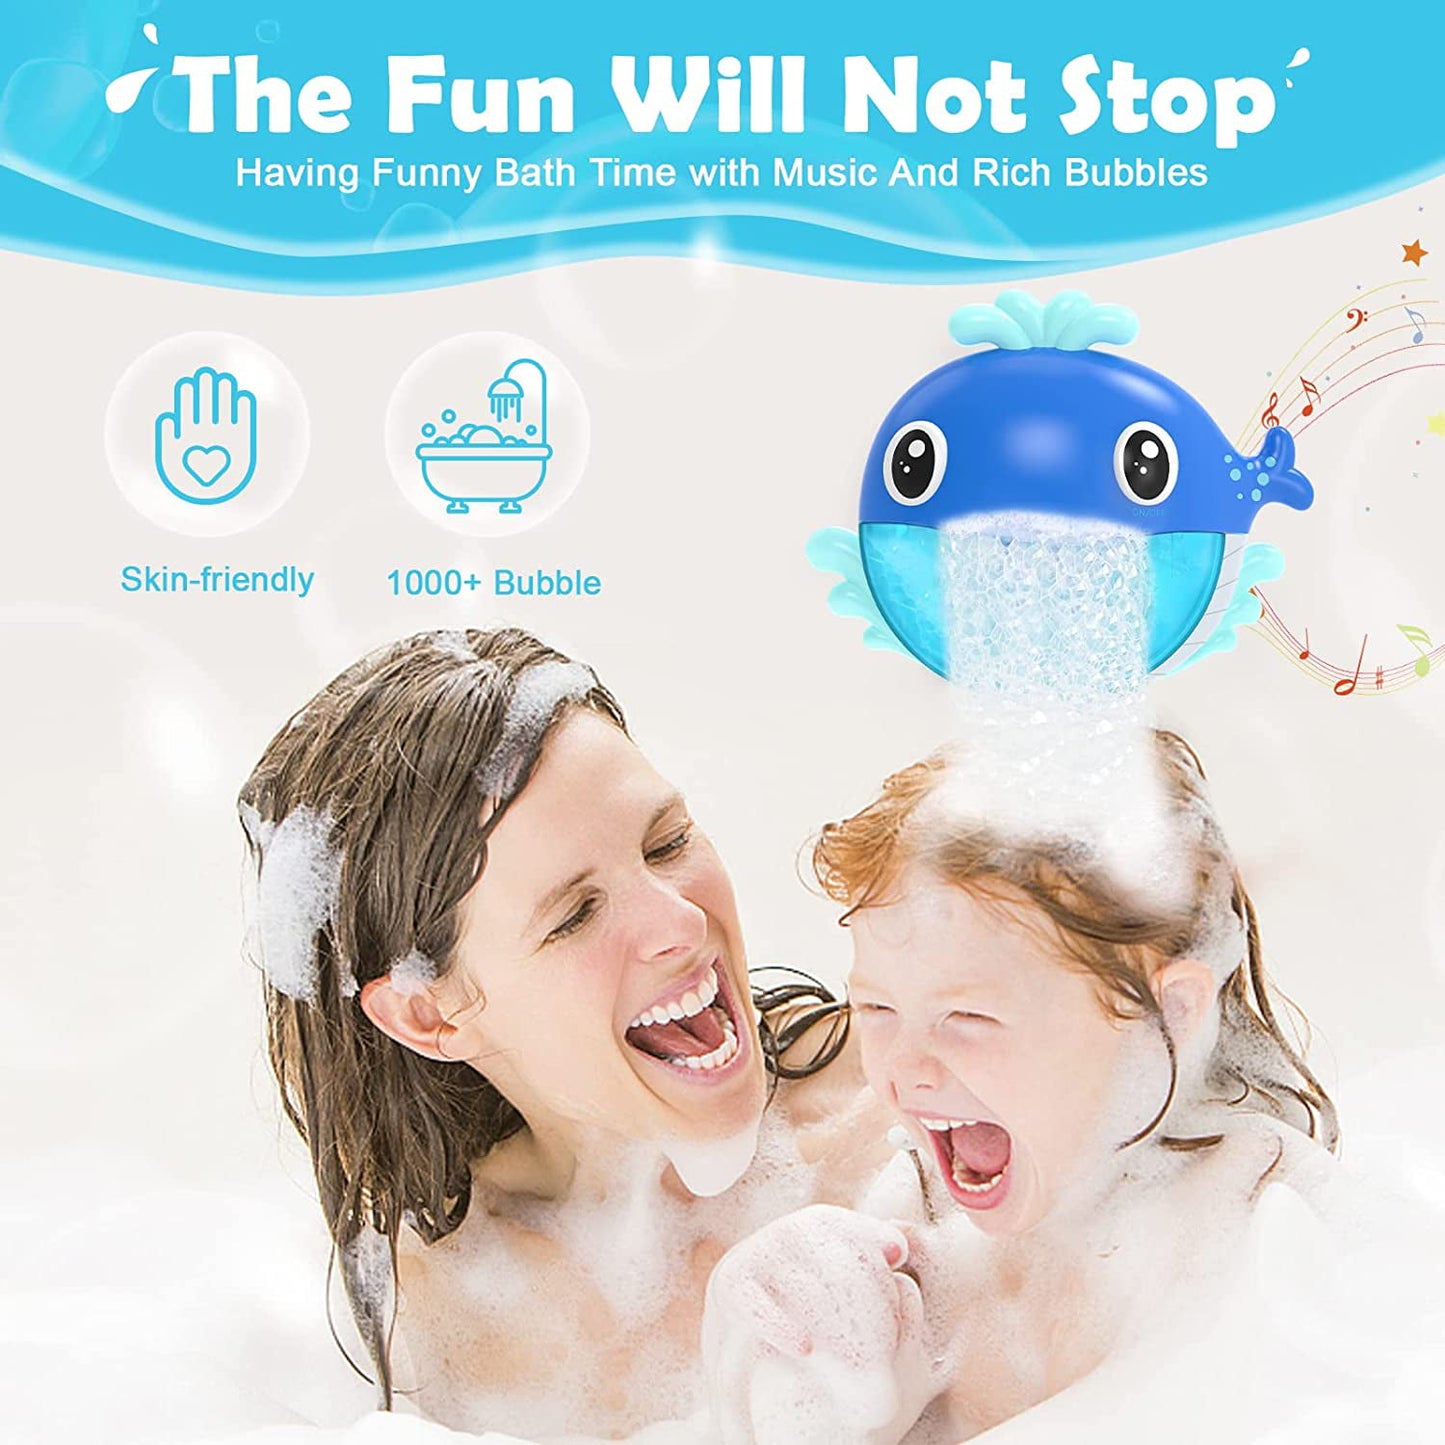 Whale Bubble Bath Toy for Kids, Blue Bubble Maker for Bathtub toys, Musical Foam Blower Bubbling Machine for Baby Boys Girls 18 Months Up